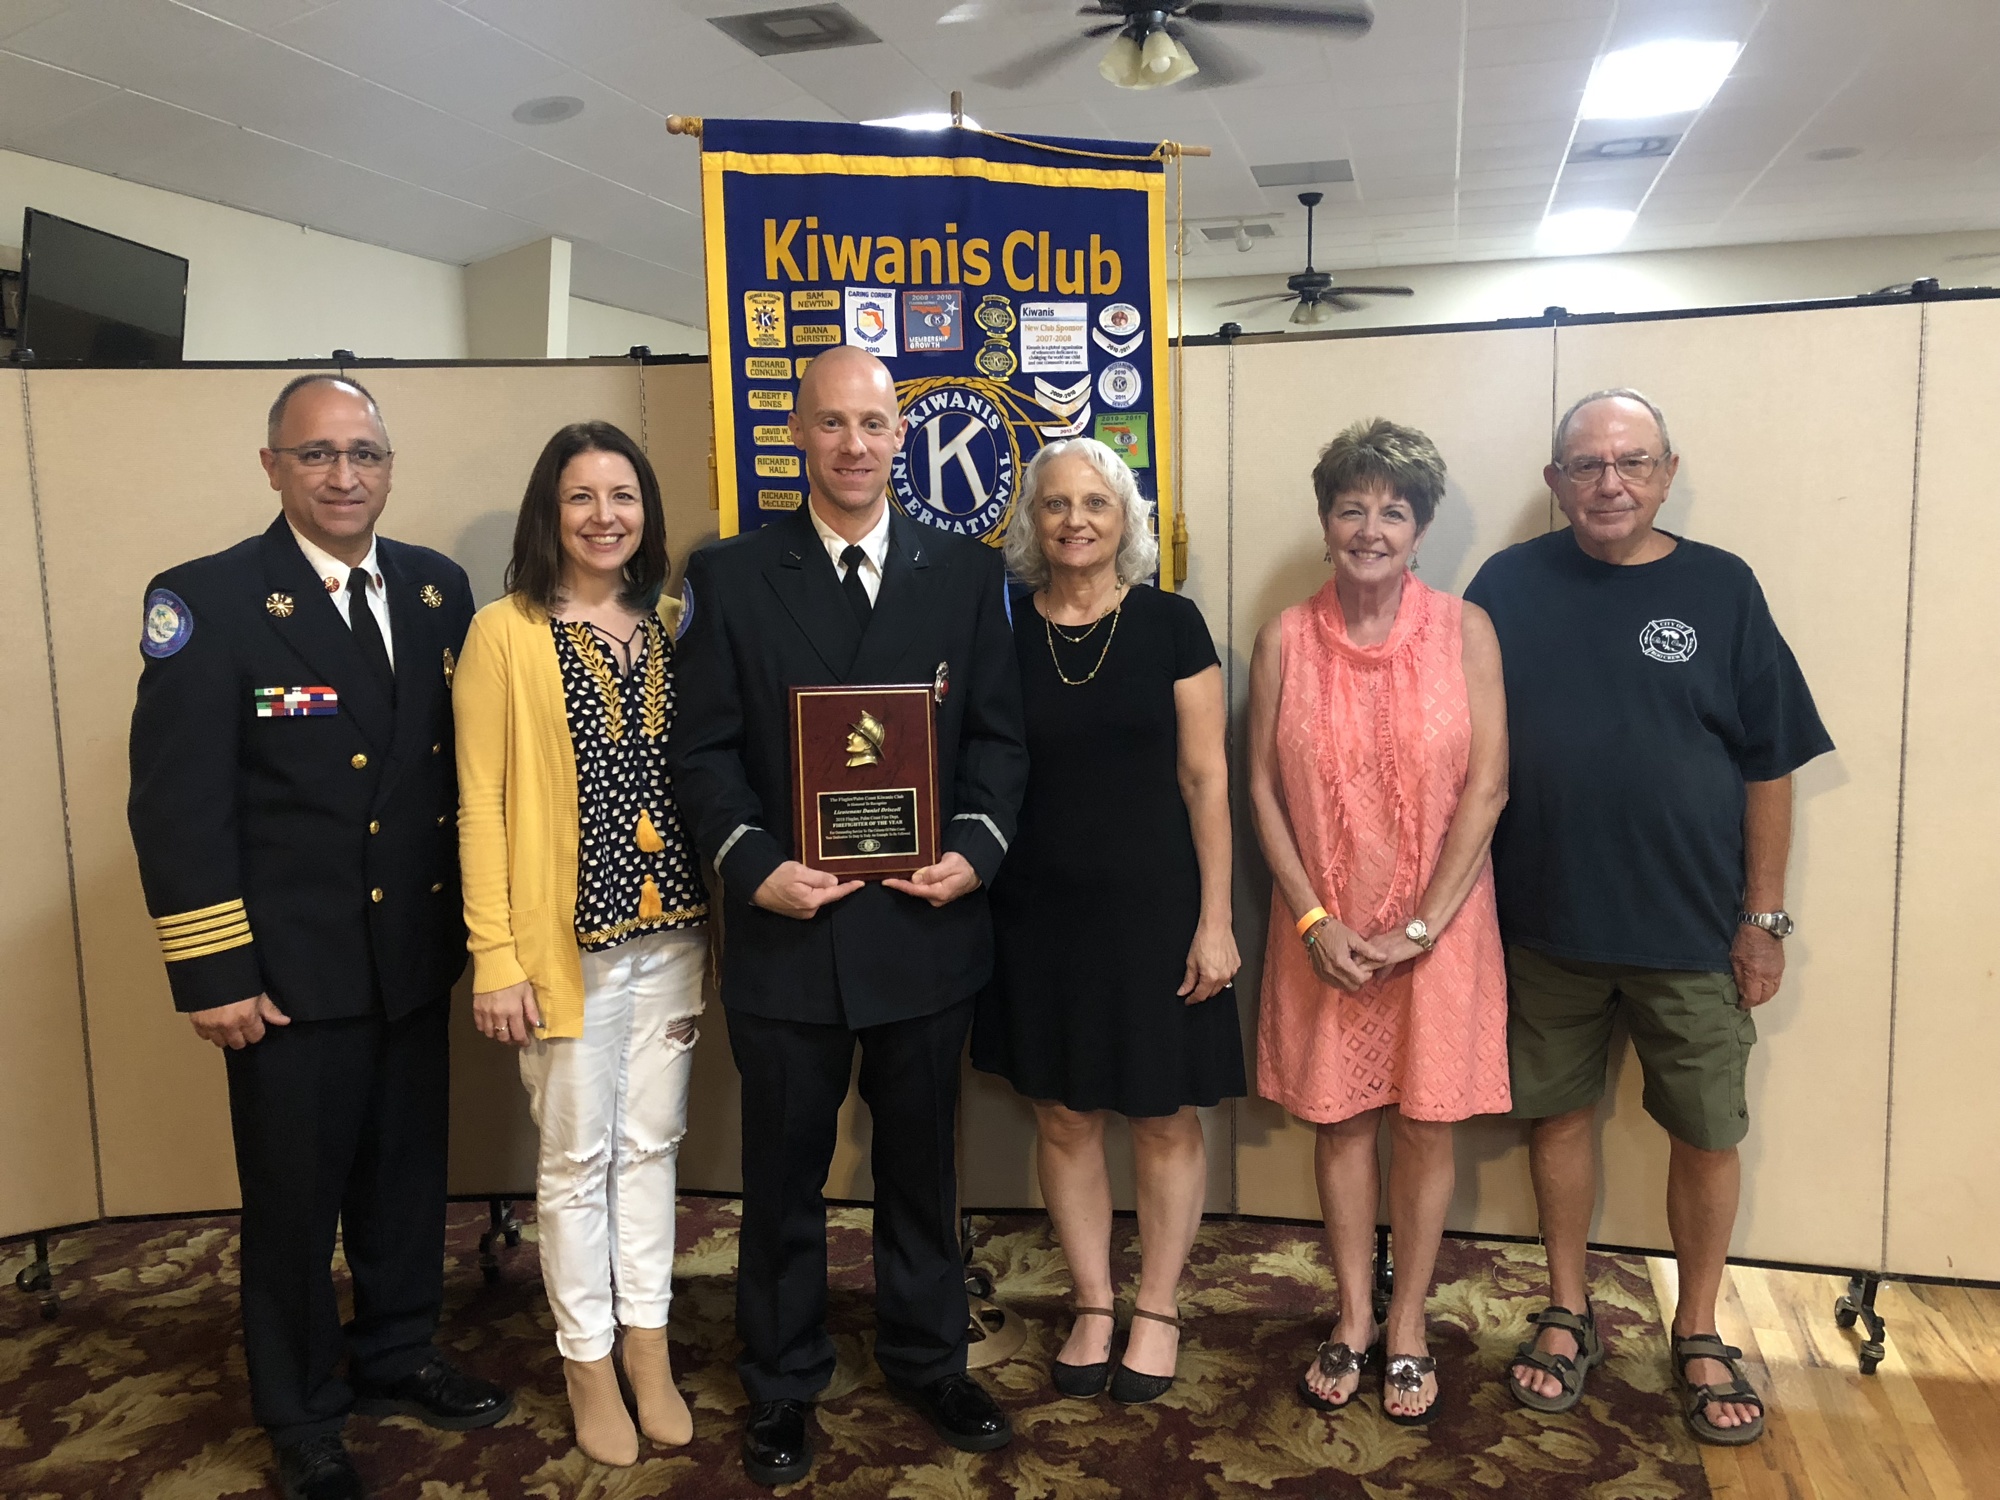 Palm Coast Fire Lt. Dan Driscoll was honored by the Flagler-Palm Coast Kiwanis Club. Pictured from left are Chief Jerry Forte, Amy Driscoll, Driscoll, Mary Driscoll, Cindy Ser and Bill Ser. Photo courtesy city of Palm Coast